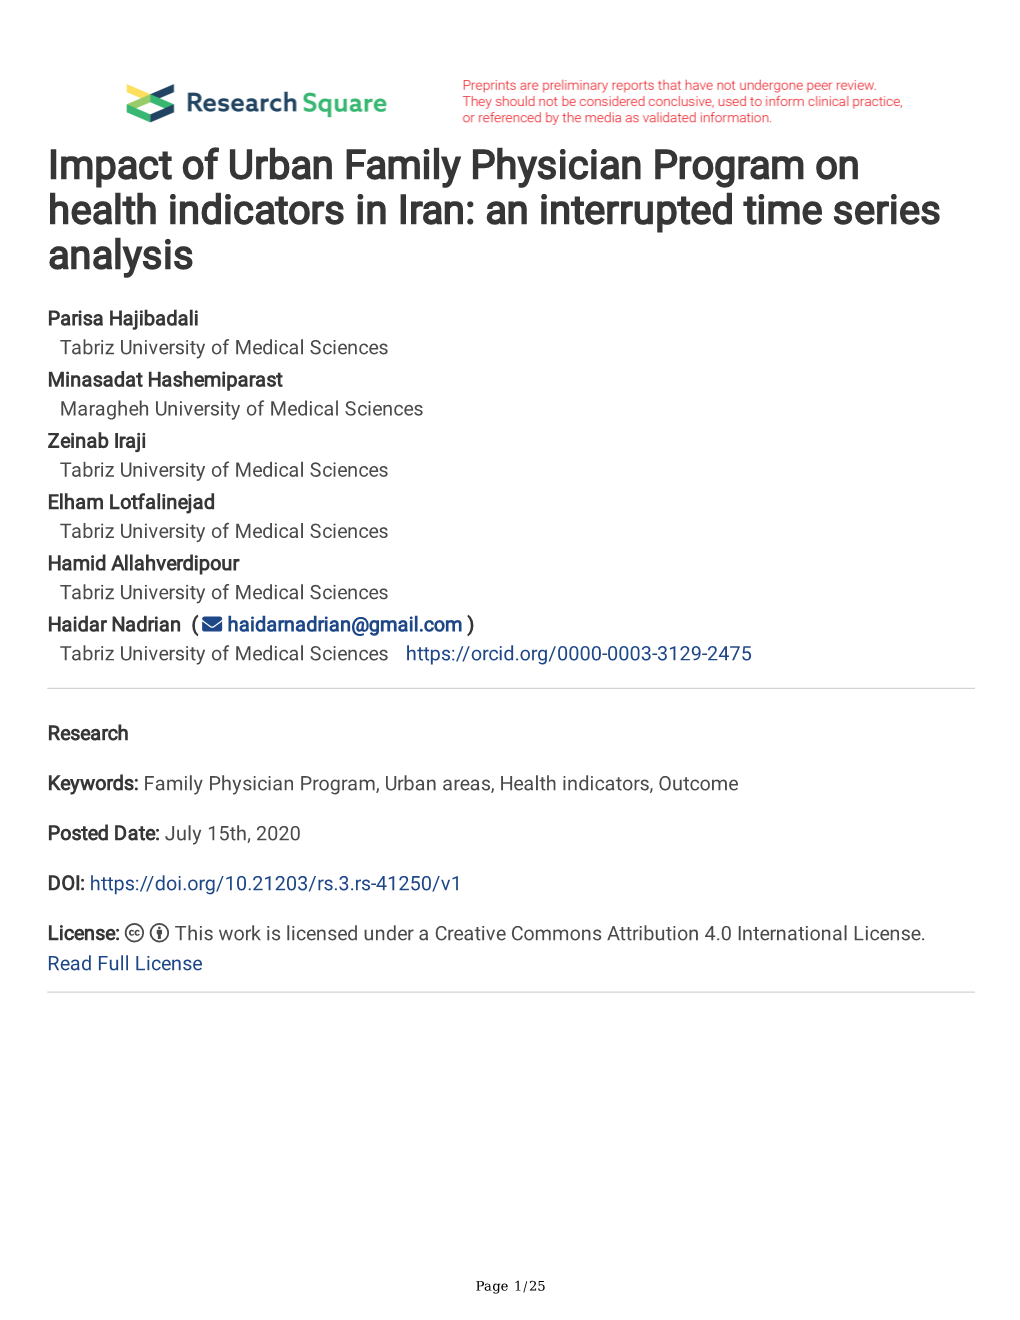 Impact of Urban Family Physician Program on Health Indicators in Iran: an Interrupted Time Series Analysis